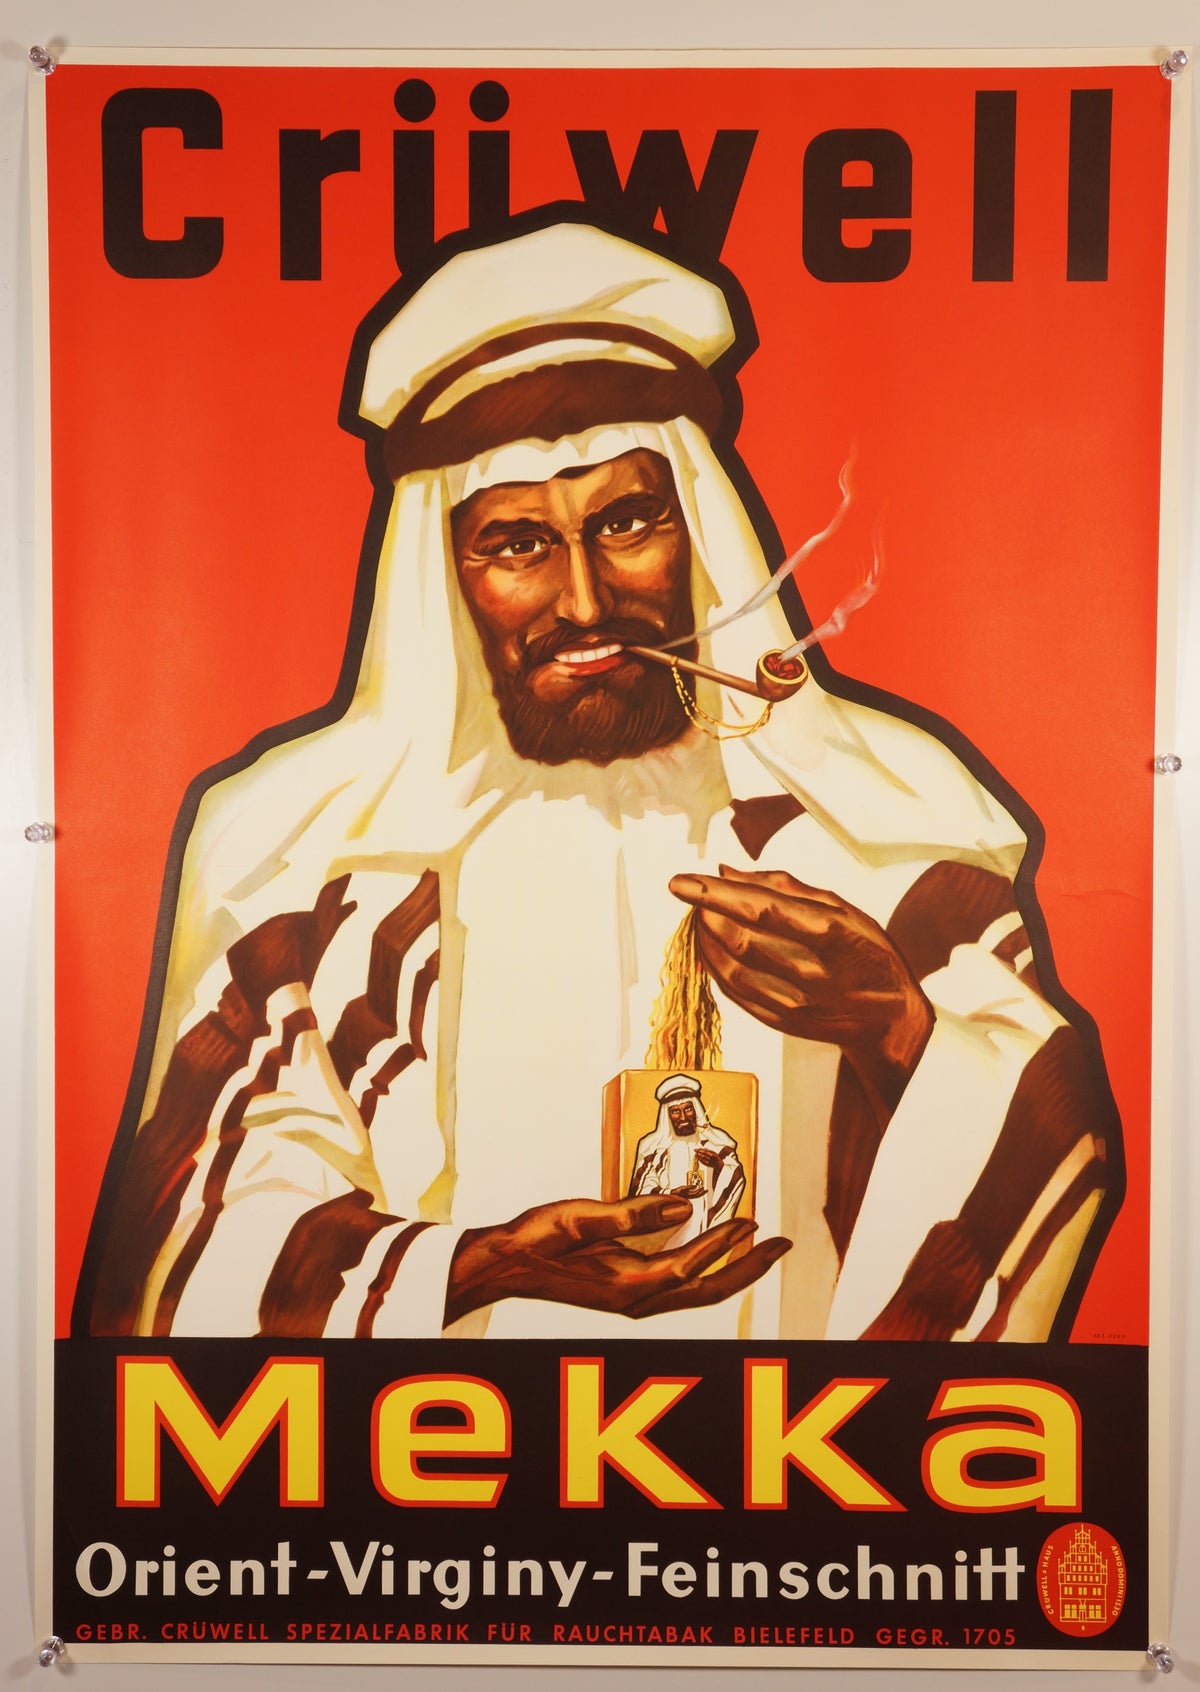 Cruwell Mekka Tobacco - Authentic Vintage Poster